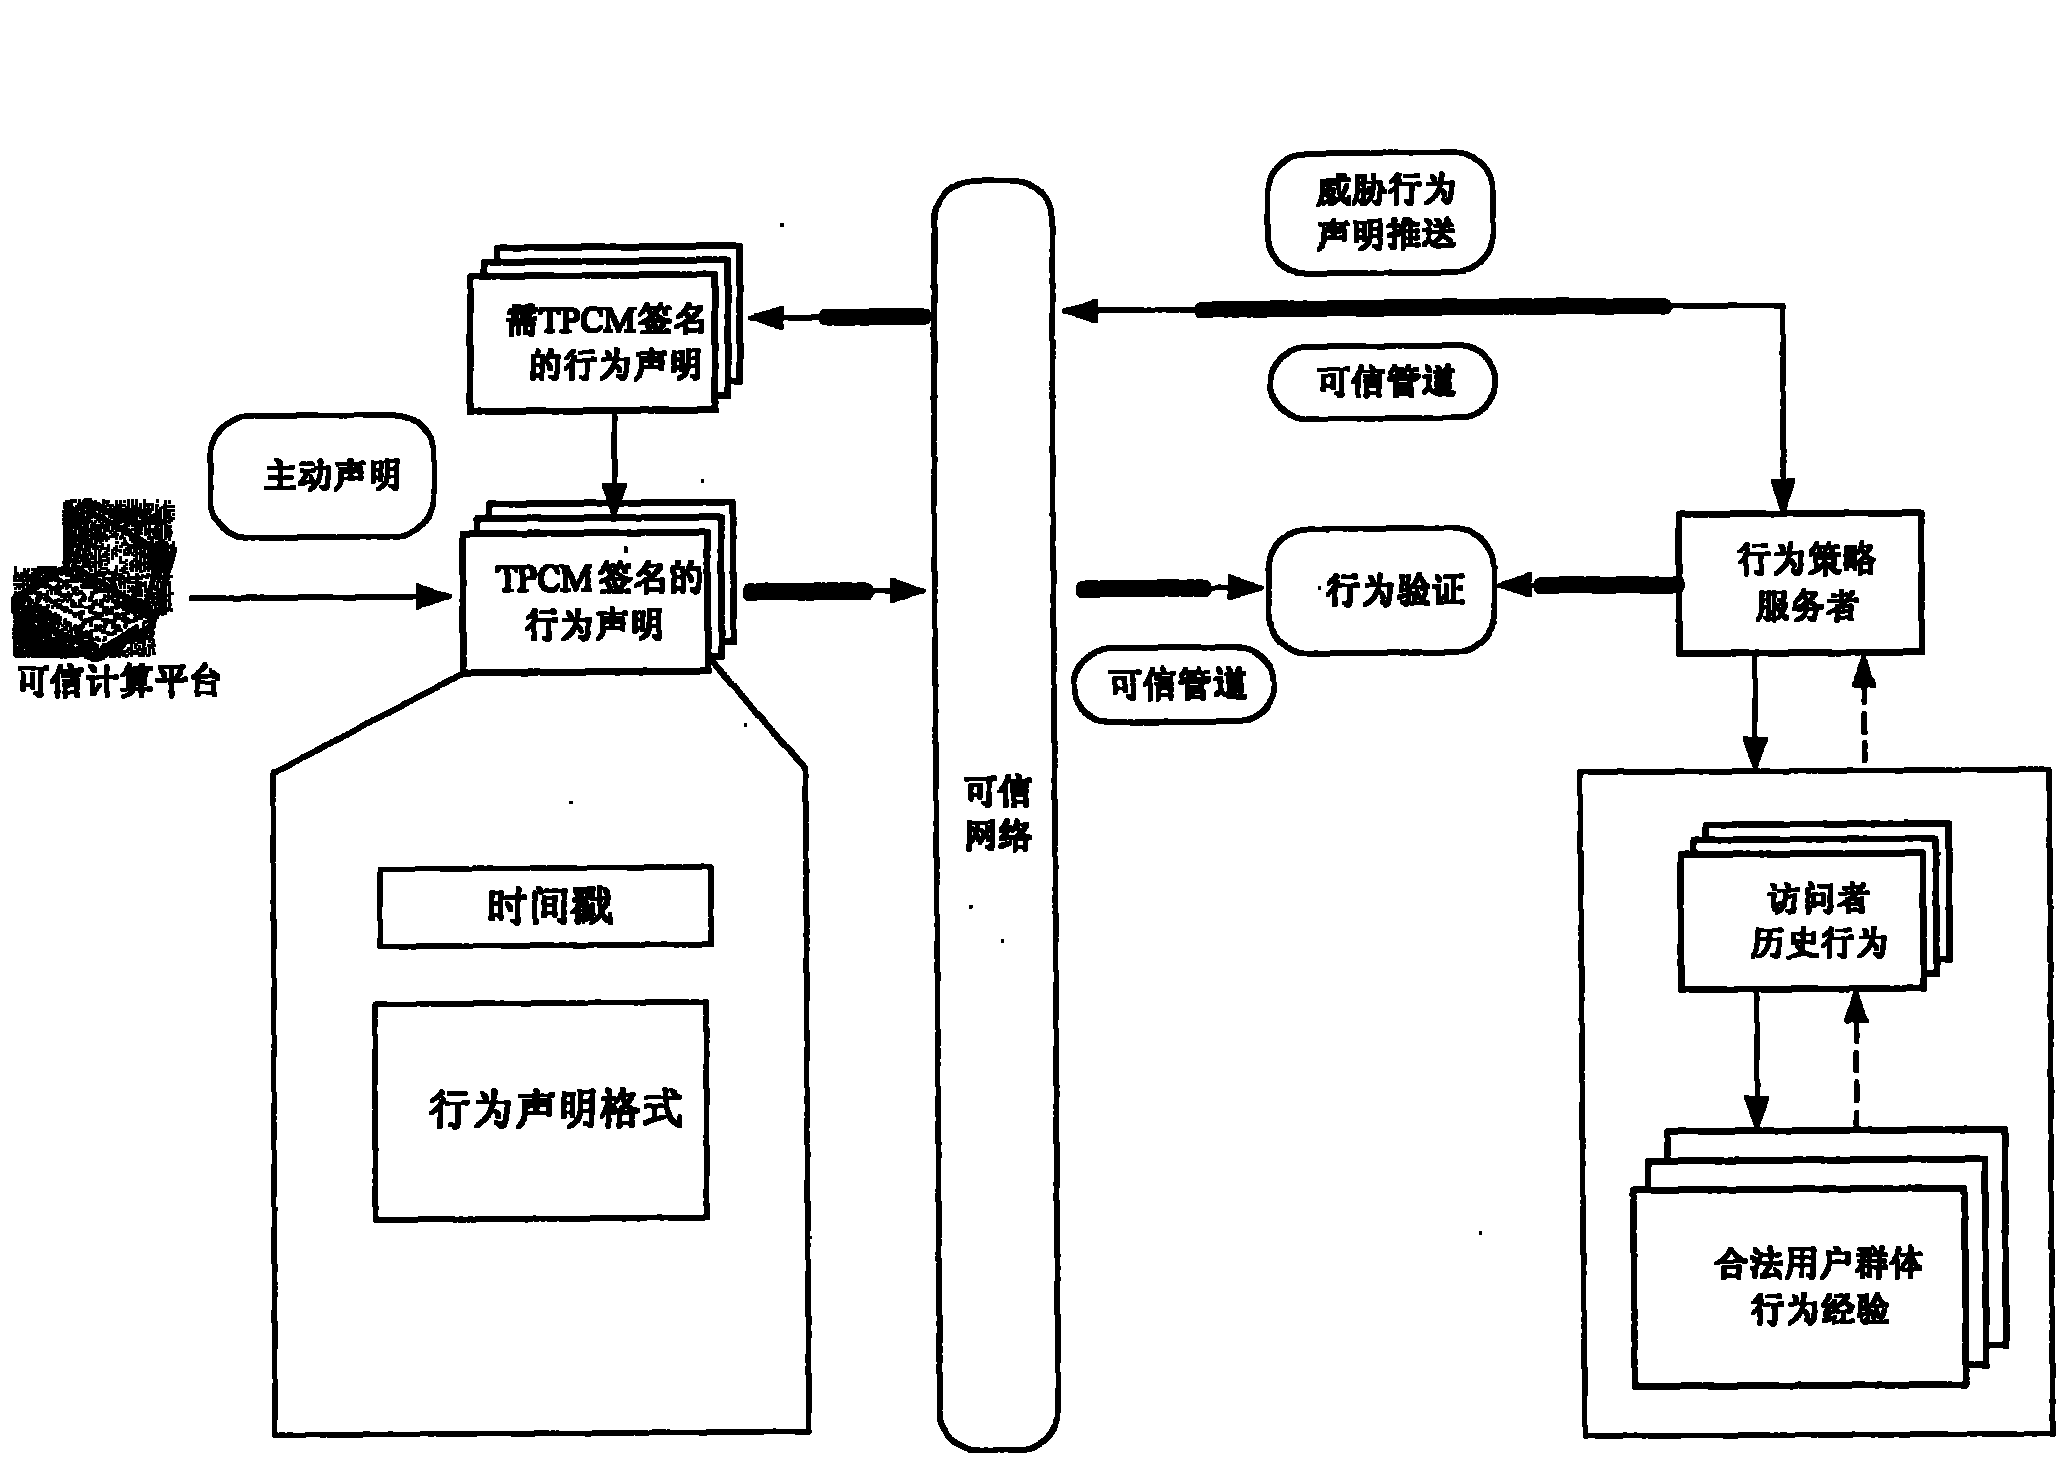 Method for pushing remote declaration based on behaviors in trusted network